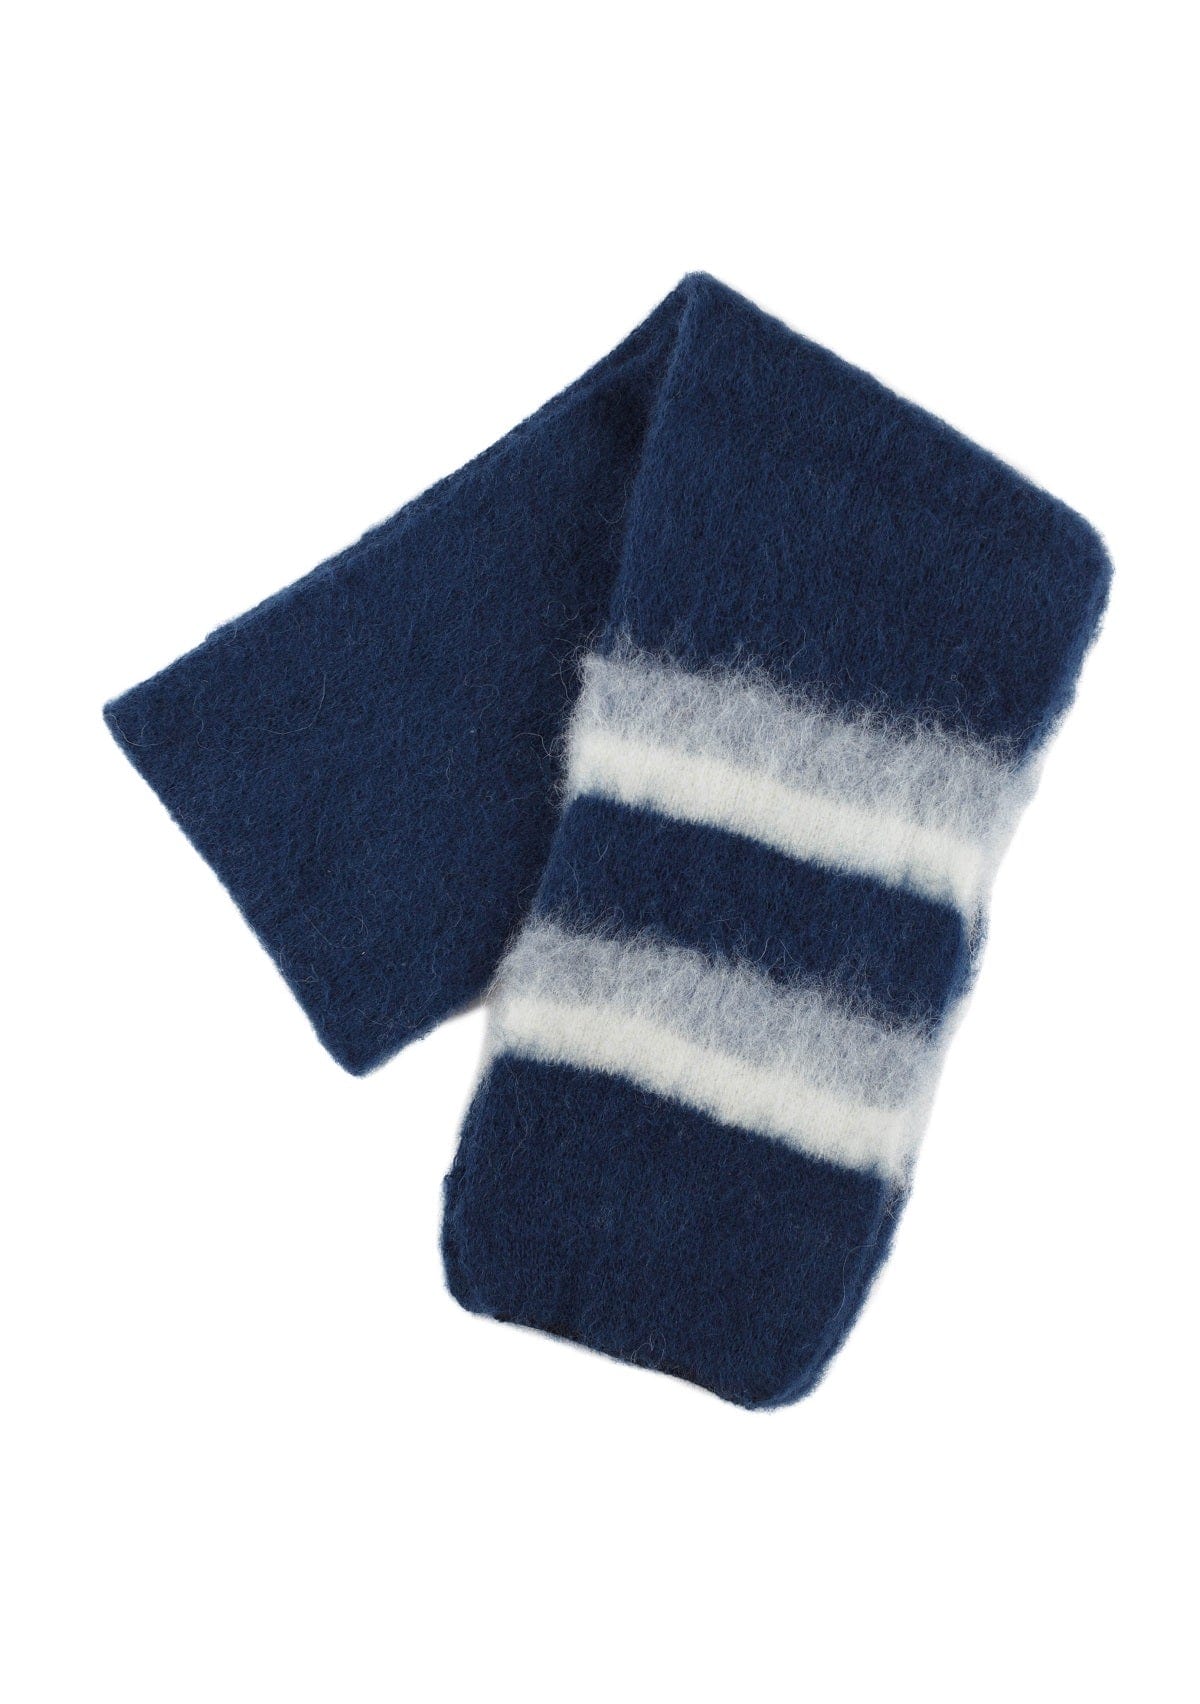 Brushed Wool - Navy Blue with white and grey stripes - The Icelandic Store